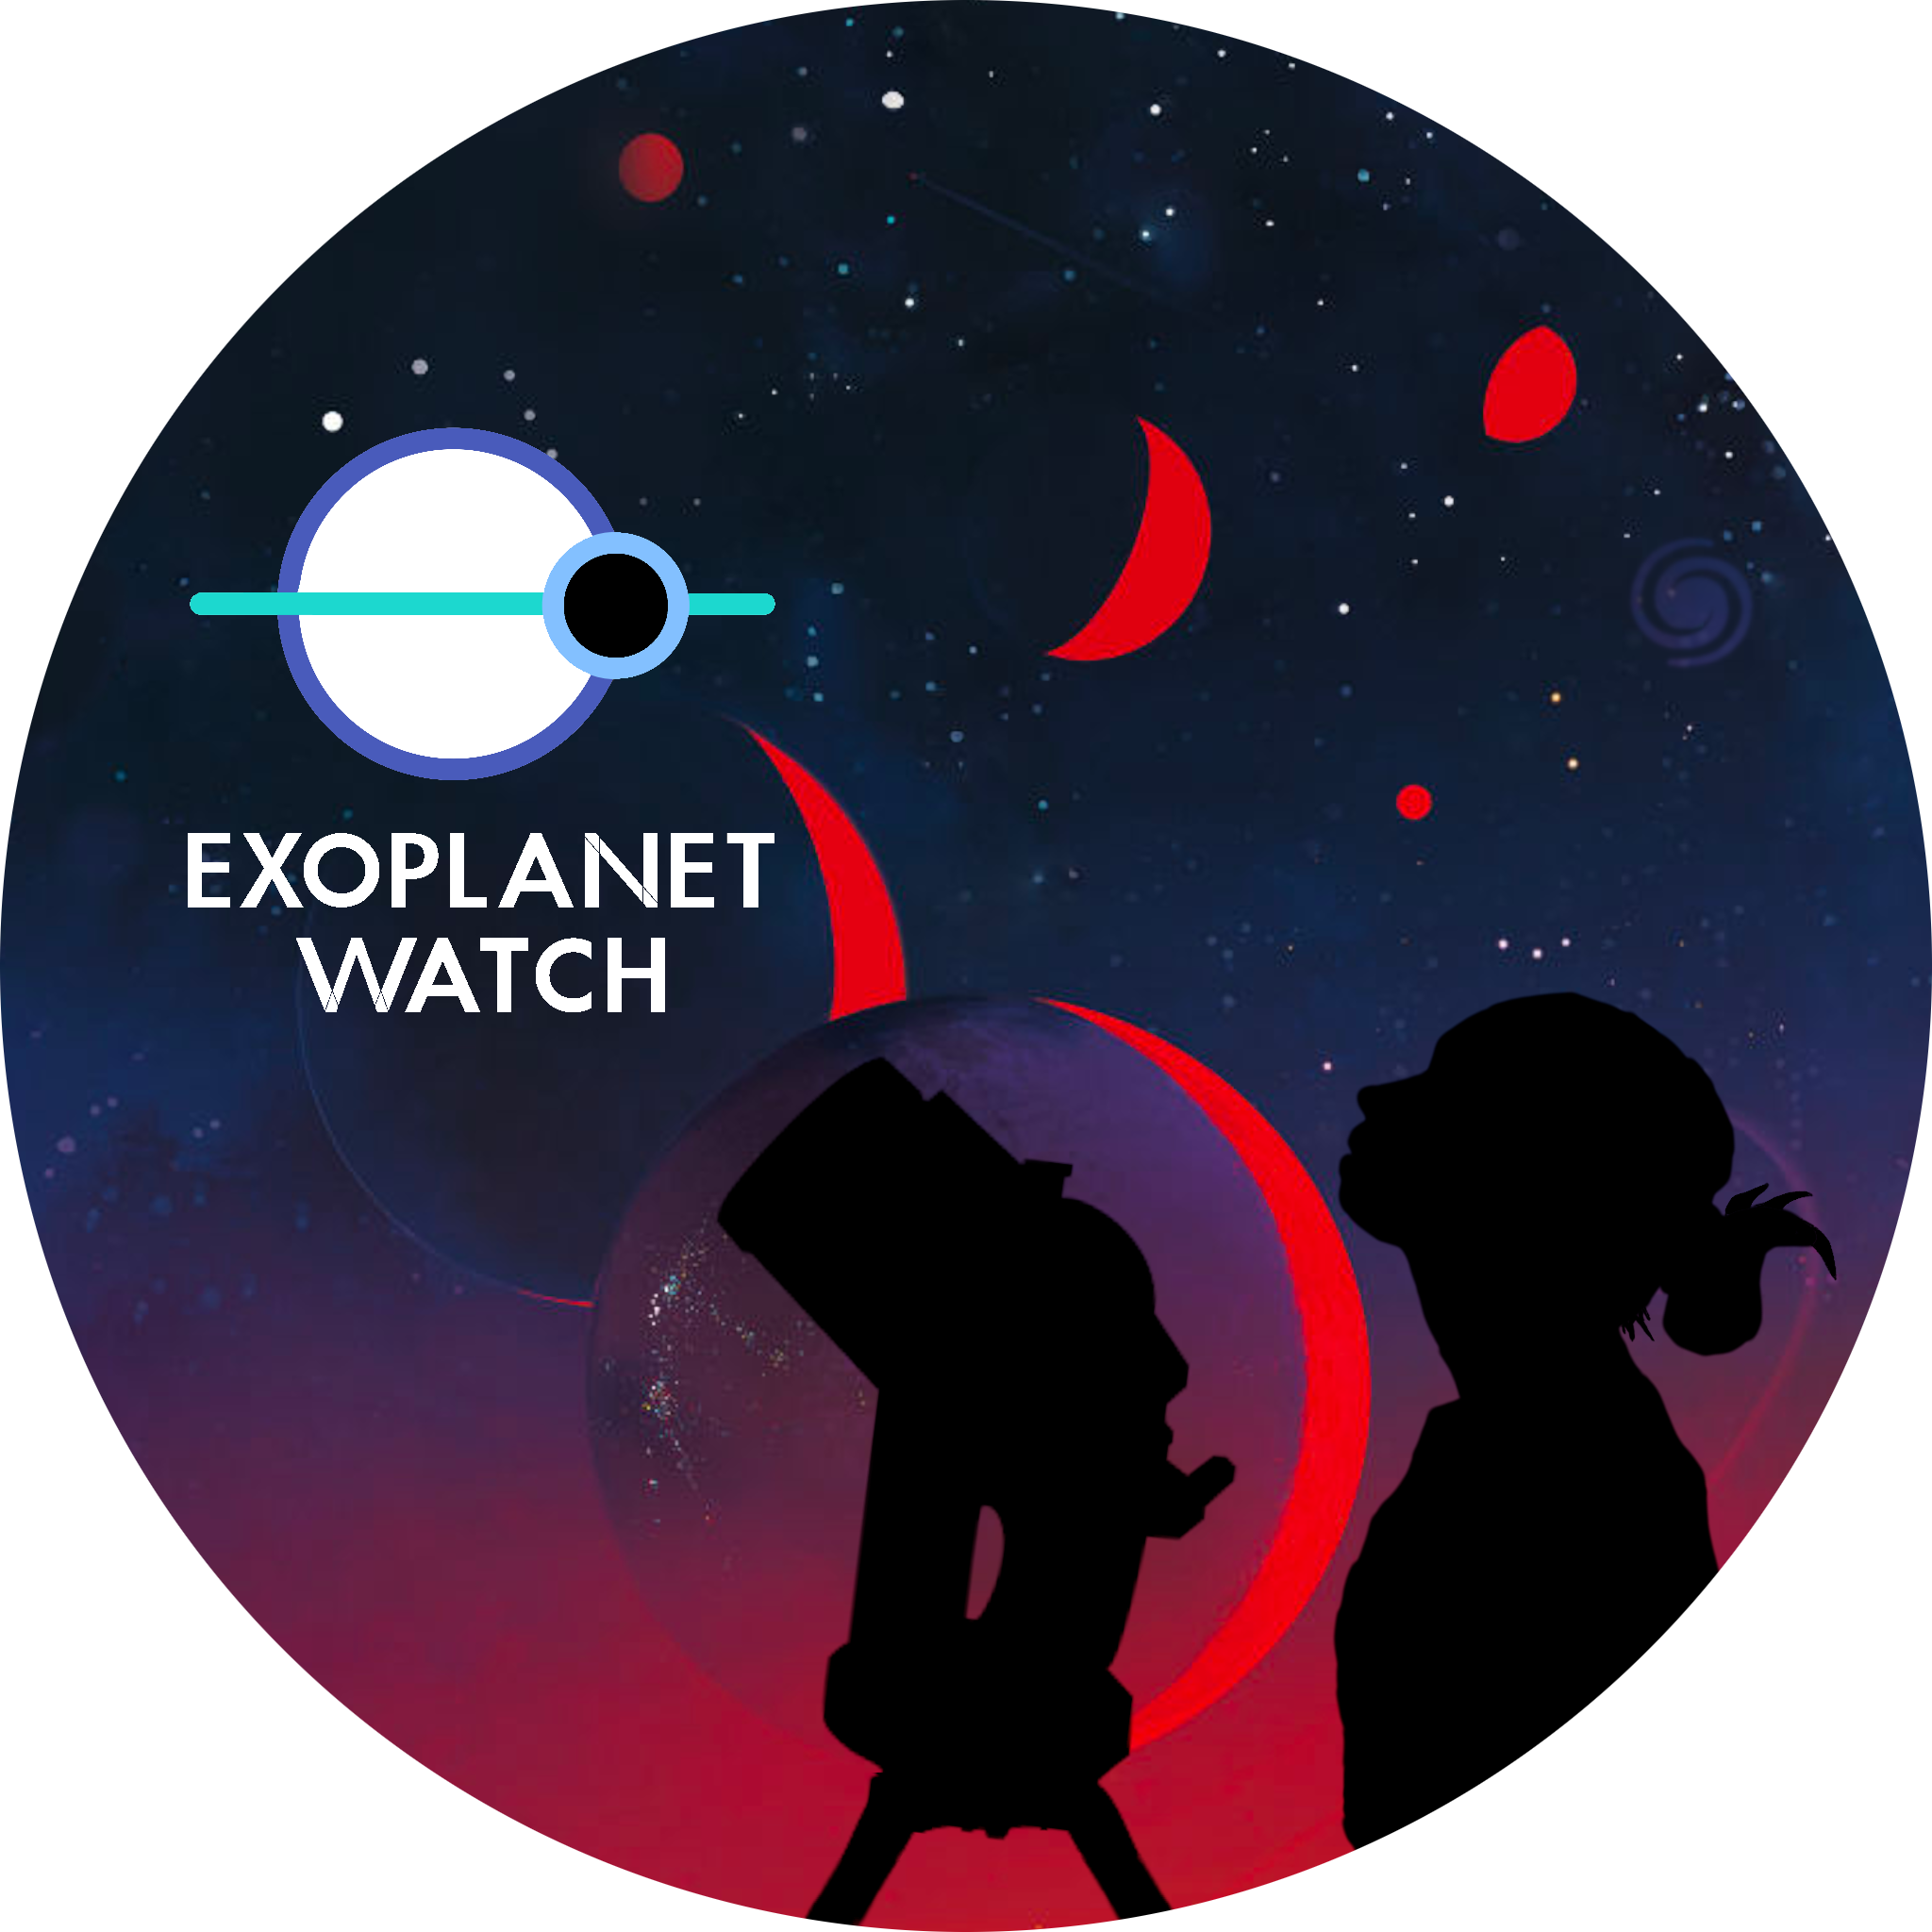 Exoplanet Watch. A person with a telescope looks up towards a symbol of a transiting exoplanet against a background of exoplanets in the night sky. 